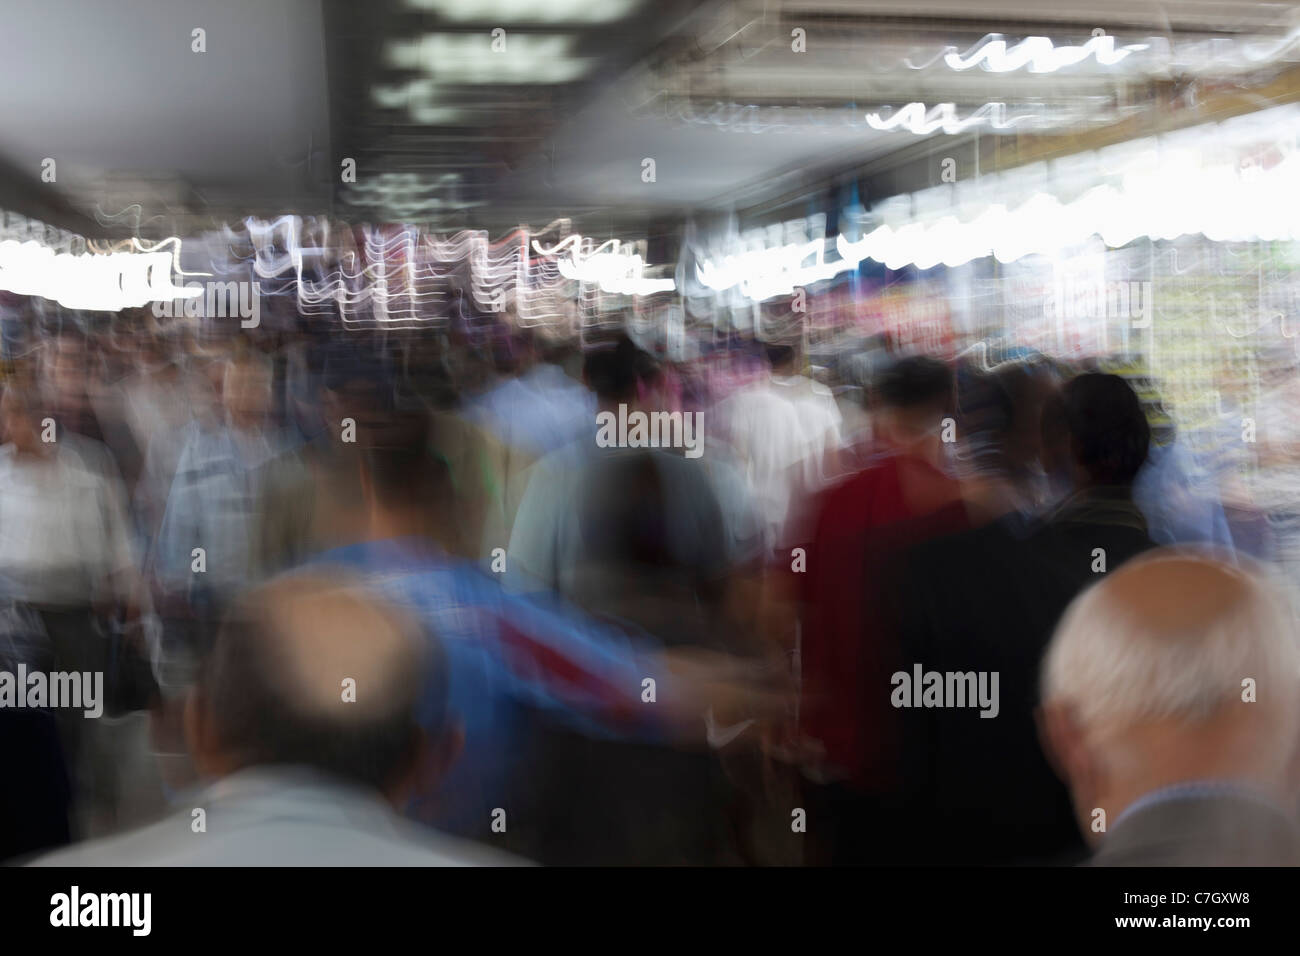 A crowd of men on the move, rear view Stock Photo